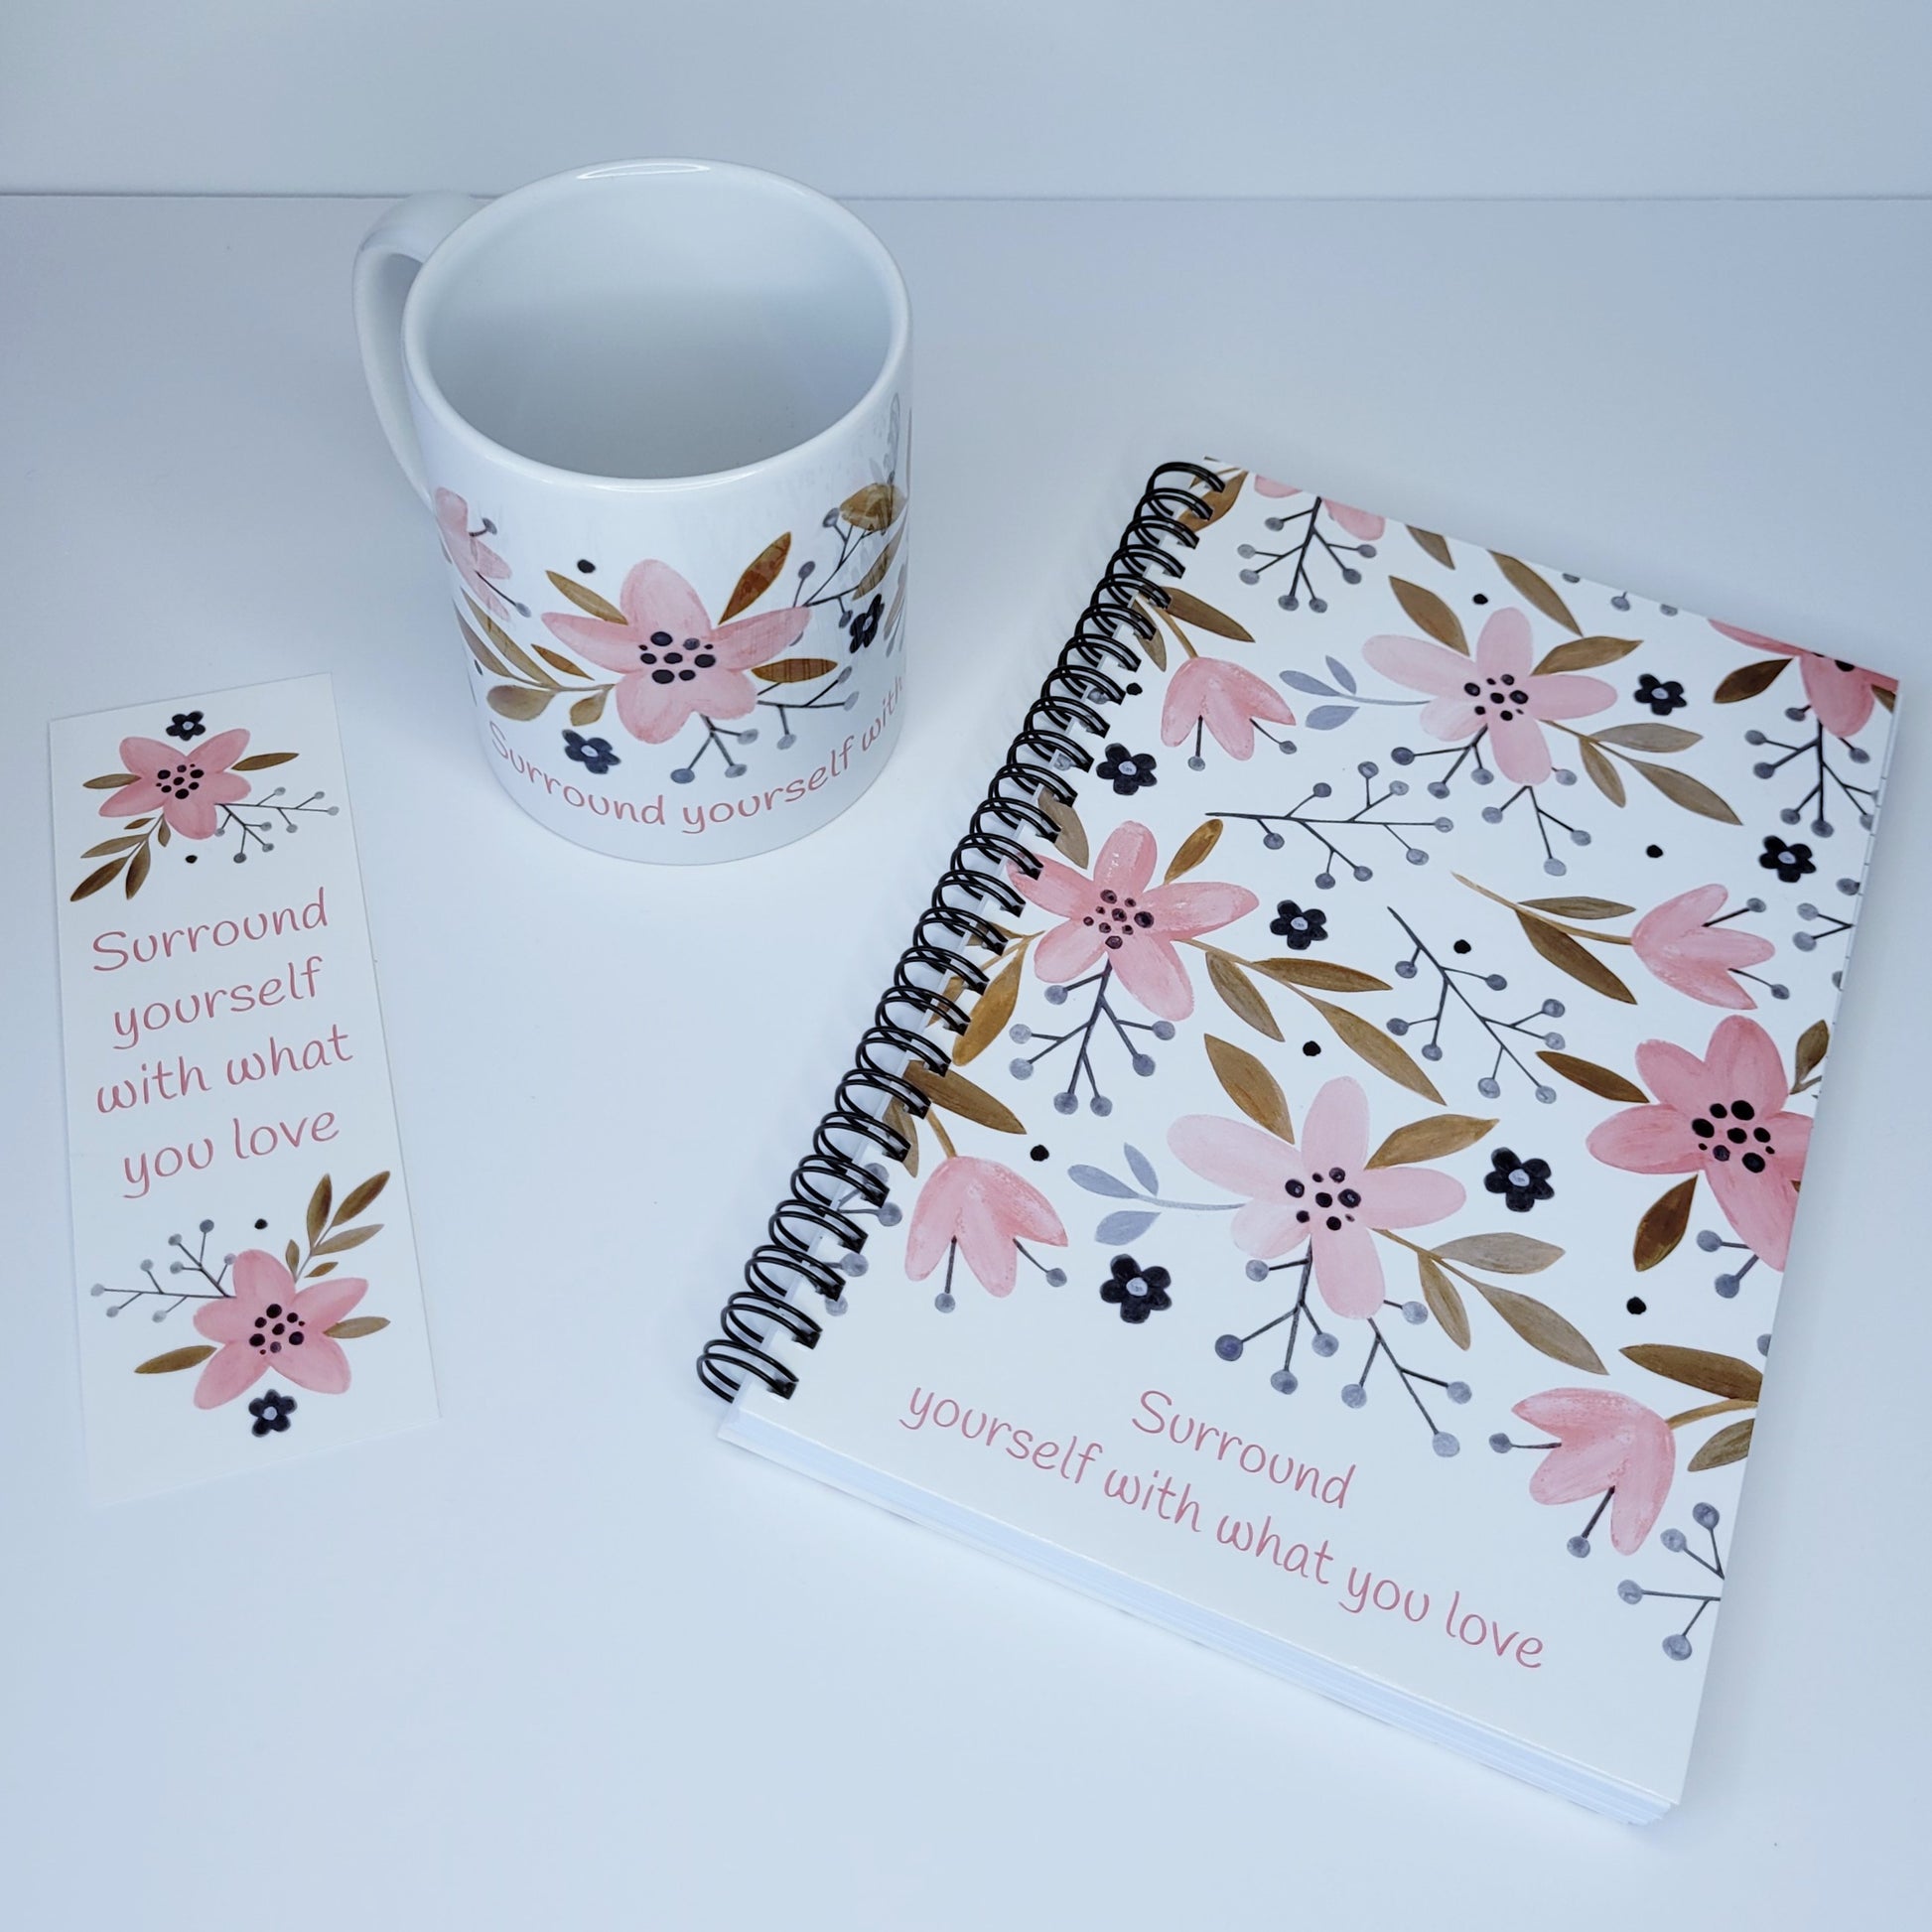 Our exclusive notebook designed in-house has a cute floral print in pinks, tans, and navy blue. The cover reads "Surround yourself with what you love" in a fun pink font. The floral design also decorates the back cover with the words "be a blessing... today, tomorrow, always". | Shown with matching bookmark FREE with purchase of notebook. | Also pictured with matching Surround yourself with what you love coffee cup - sold separately | oak7west.com